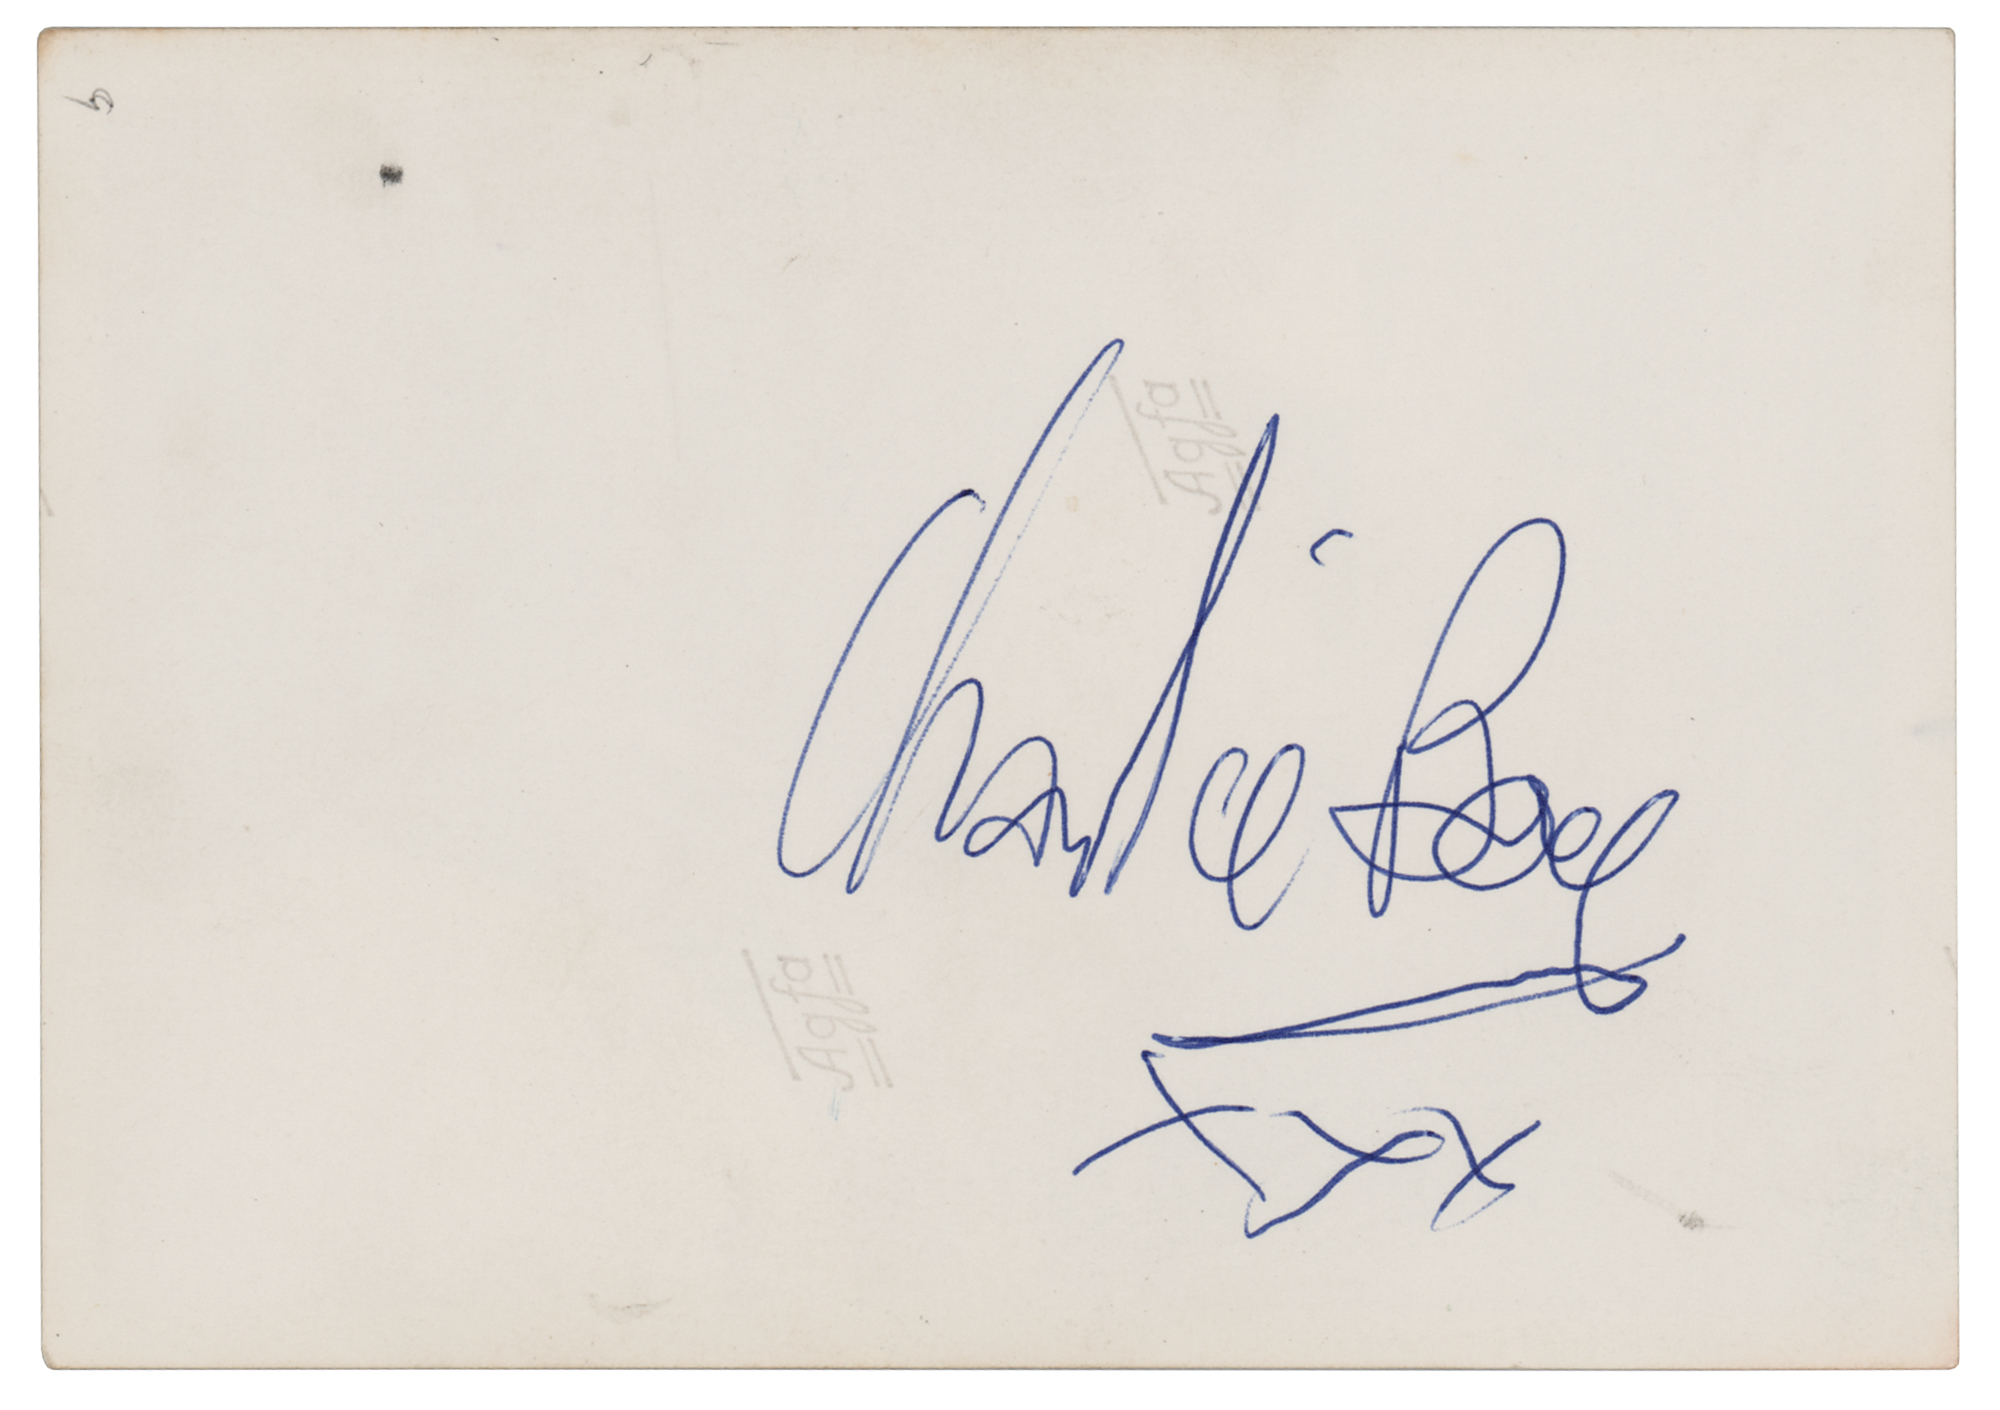 Lot #697 Rolling Stones: Charlie Watts Signed Photograph